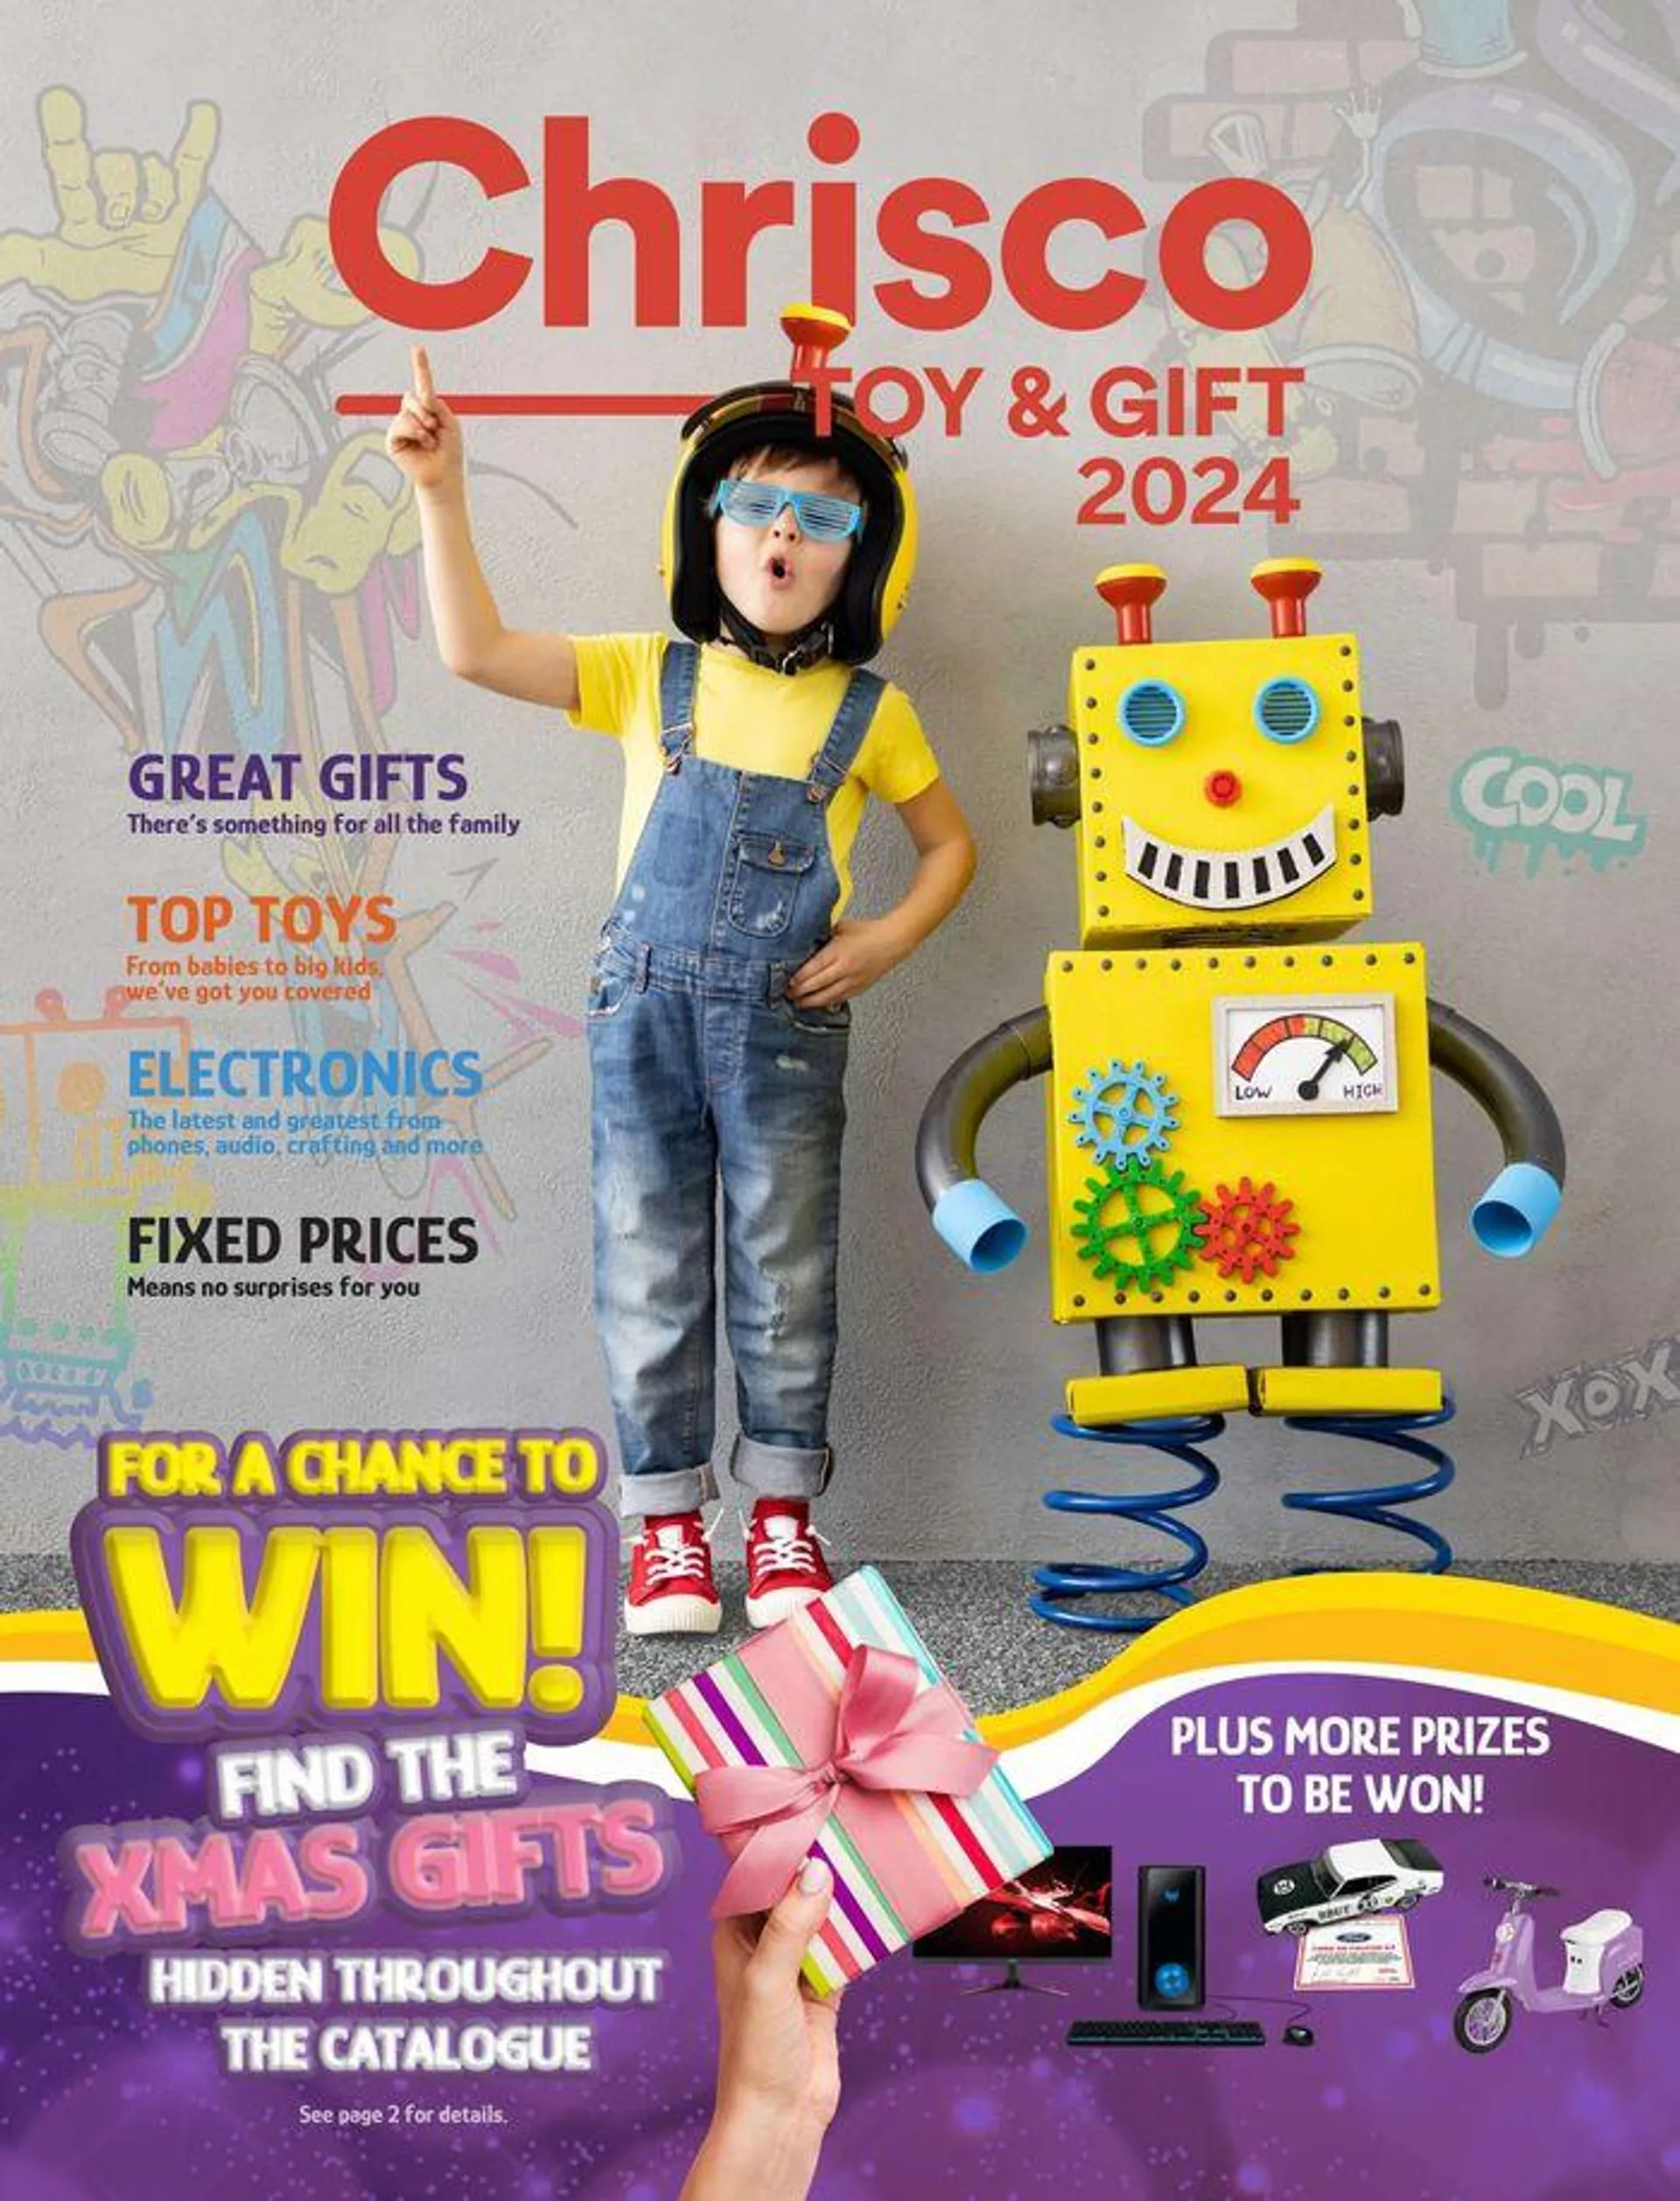 Toy & Gift 2024 Catalogue - 1